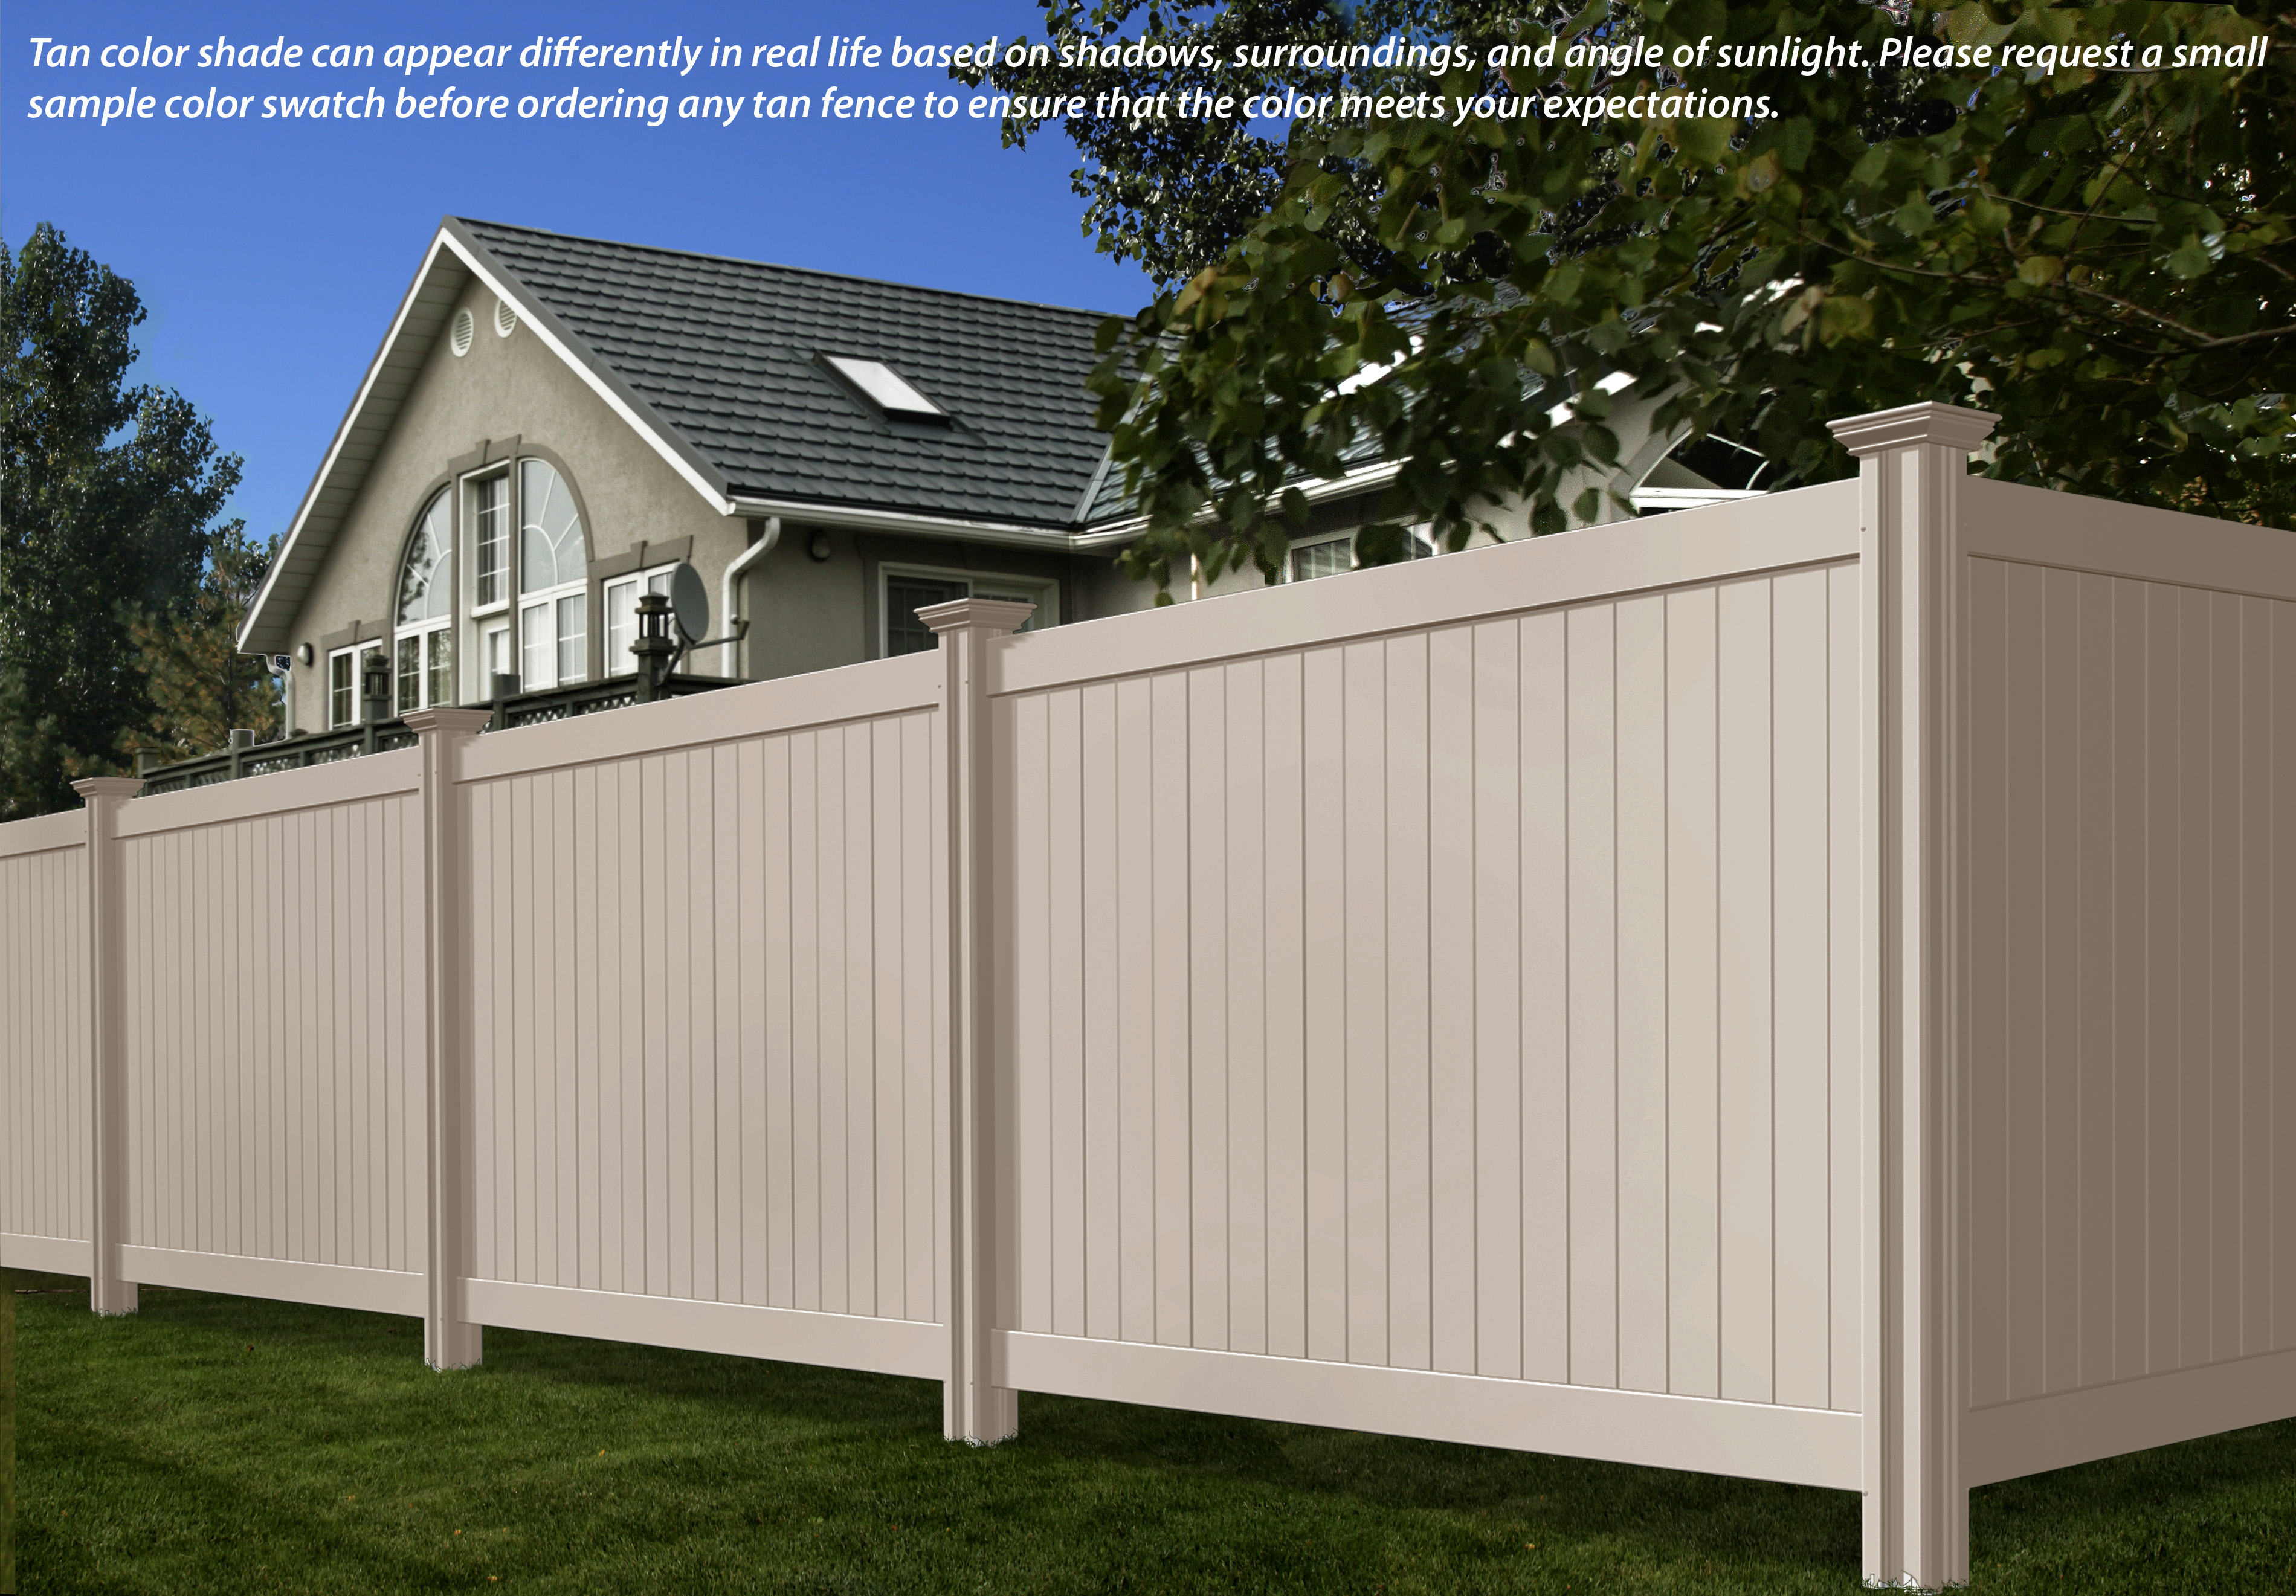 We offer a tan privacy vinyl fence